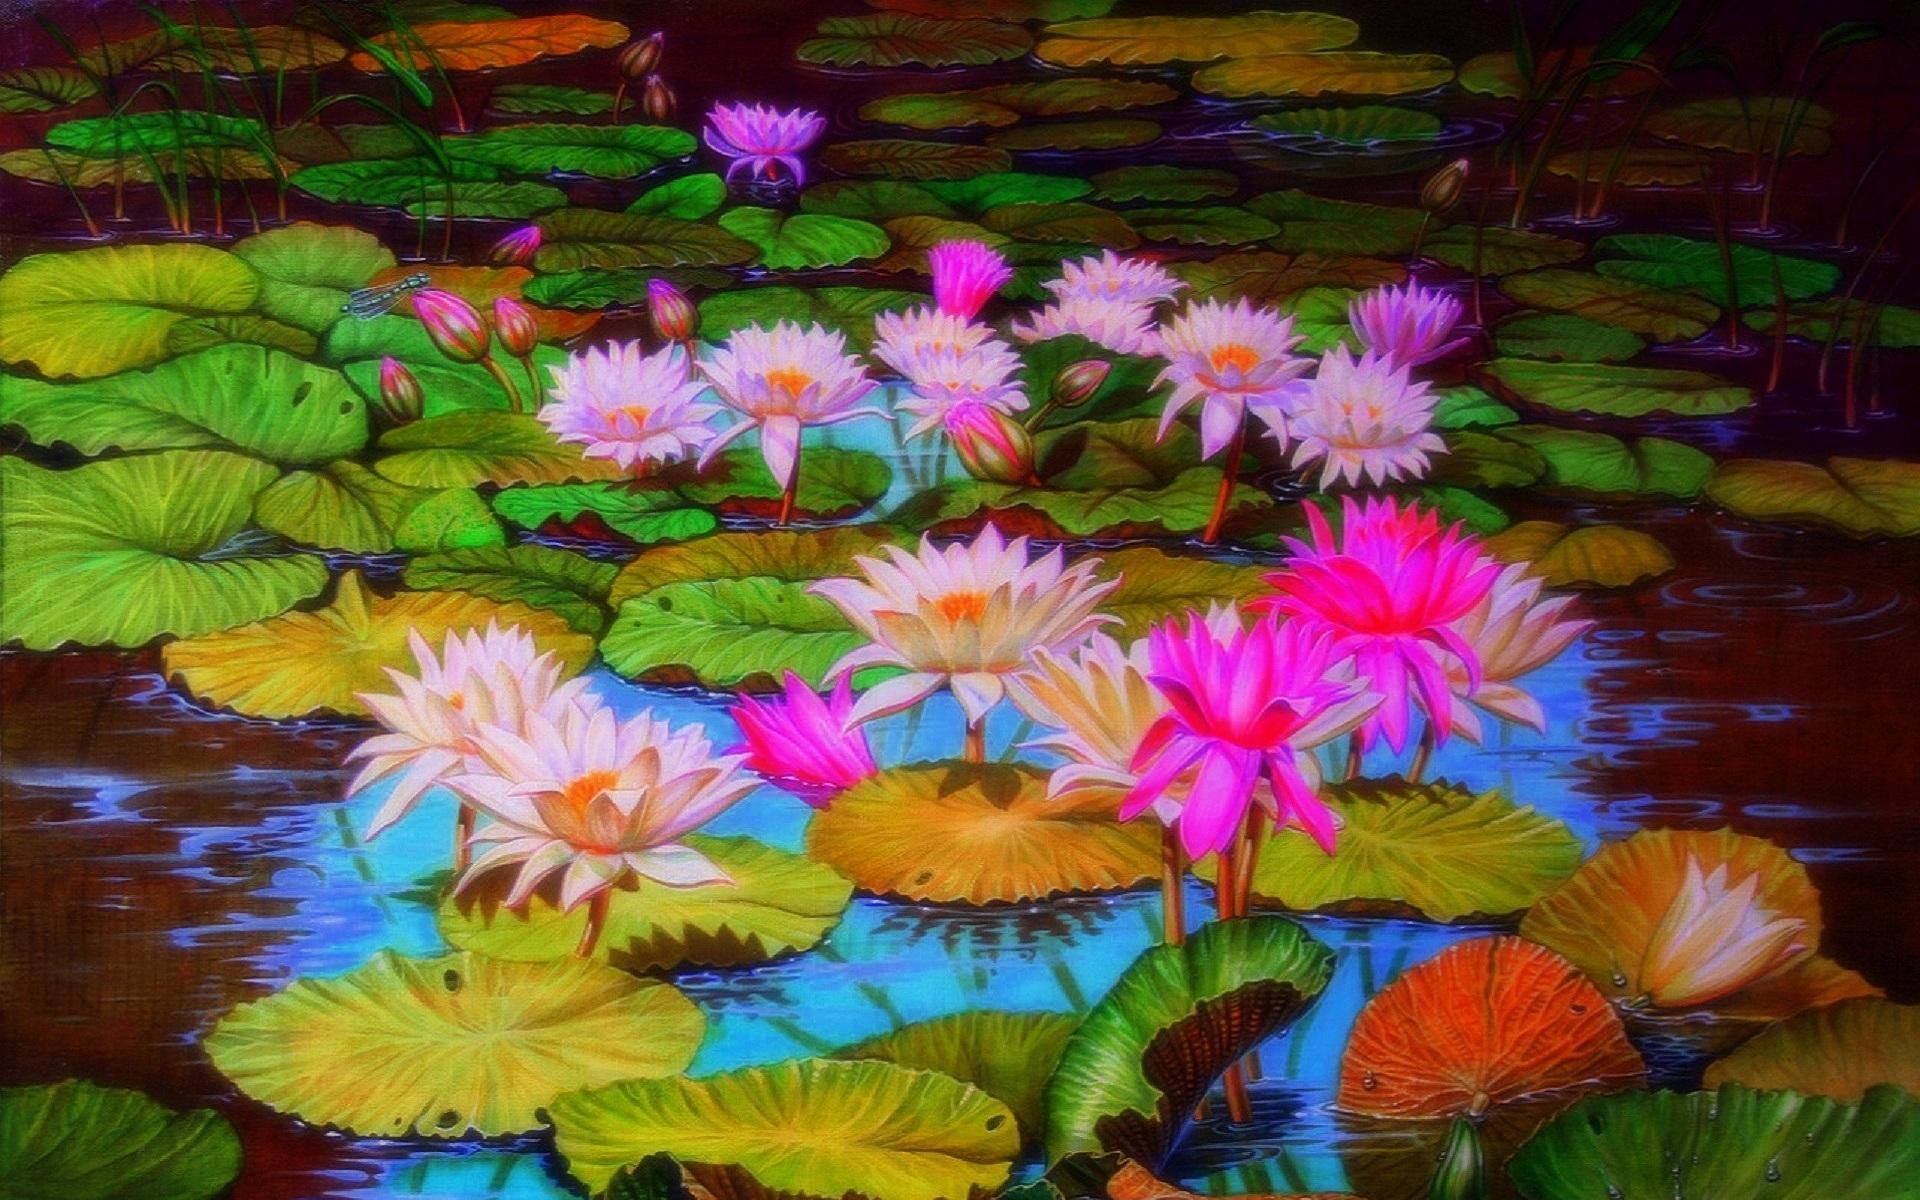 HD desktop wallpaper: Flowers, Lotus, Flower, Earth, Pond, Dragonfly, Lily  Pad download free picture #383622